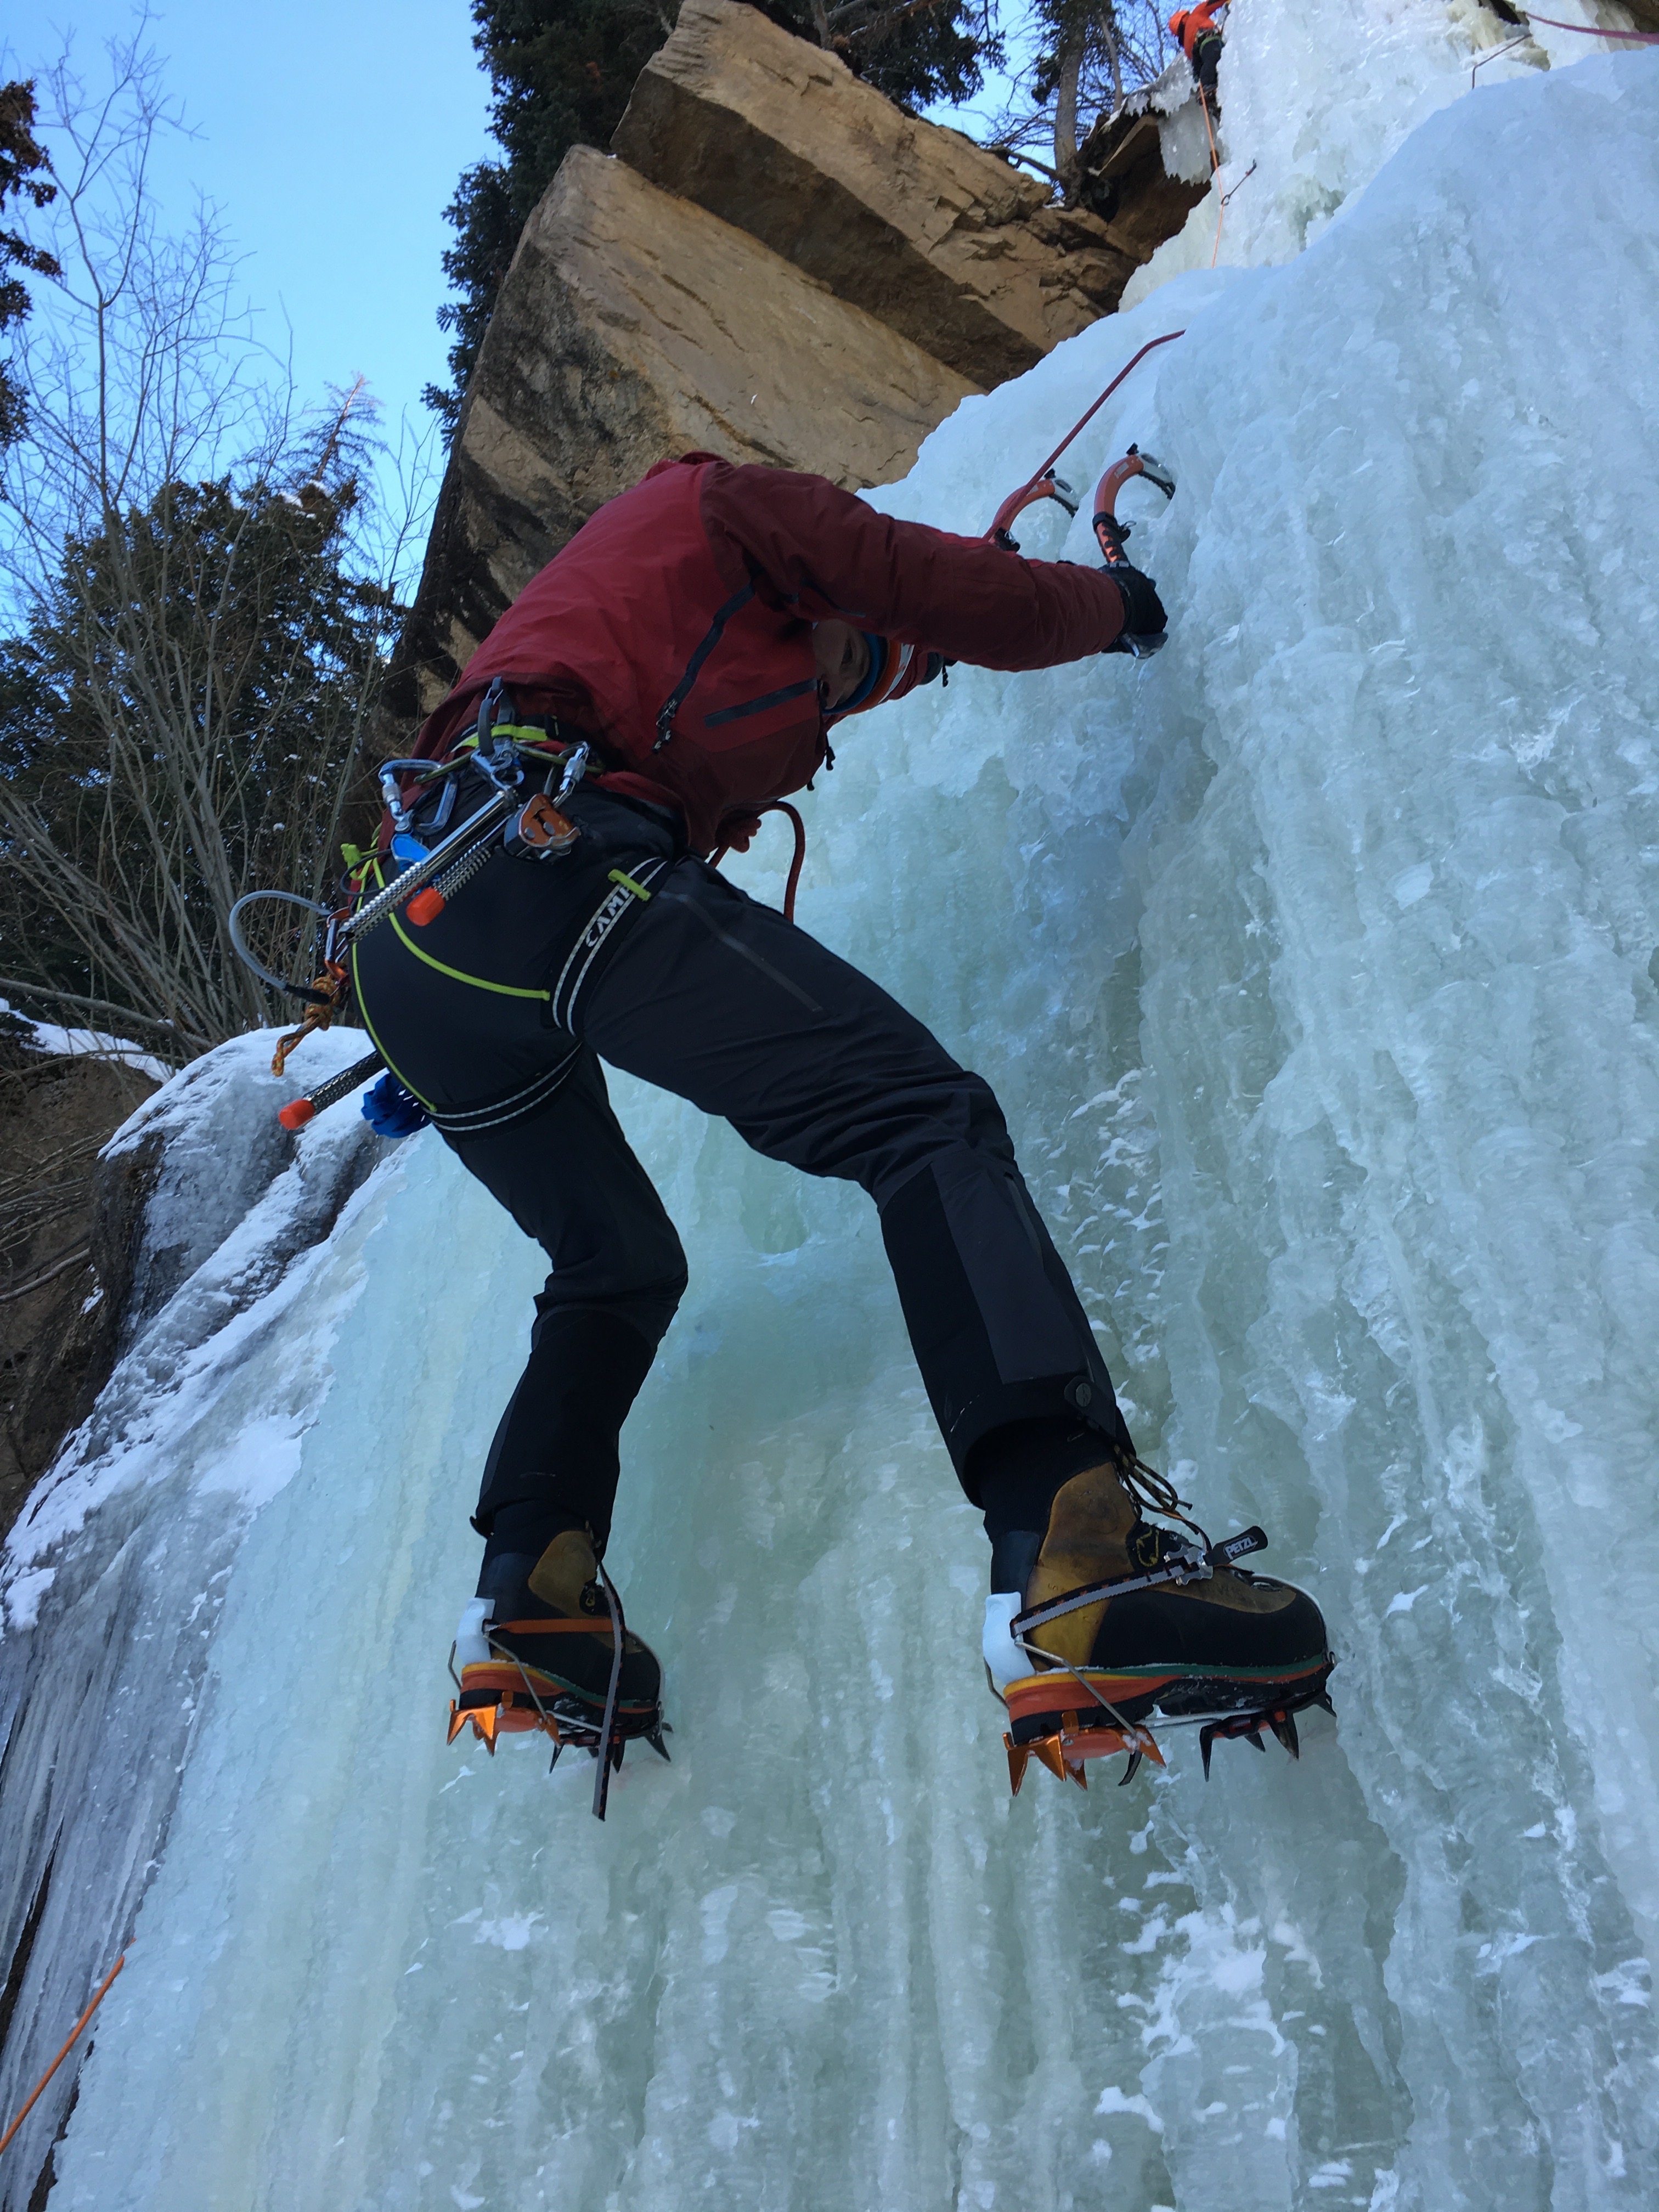 Mike Lewis climbs Hidden Falls in Rocky Mountain National Park with the calf snaps closed on the Dynafit Yotei pants. Lewis reports that he liked the calf snaps because they adapted the fit of the cuffs better for ice climbing after he used the pants for ski touring. [Photo] Eric Stoutenburg